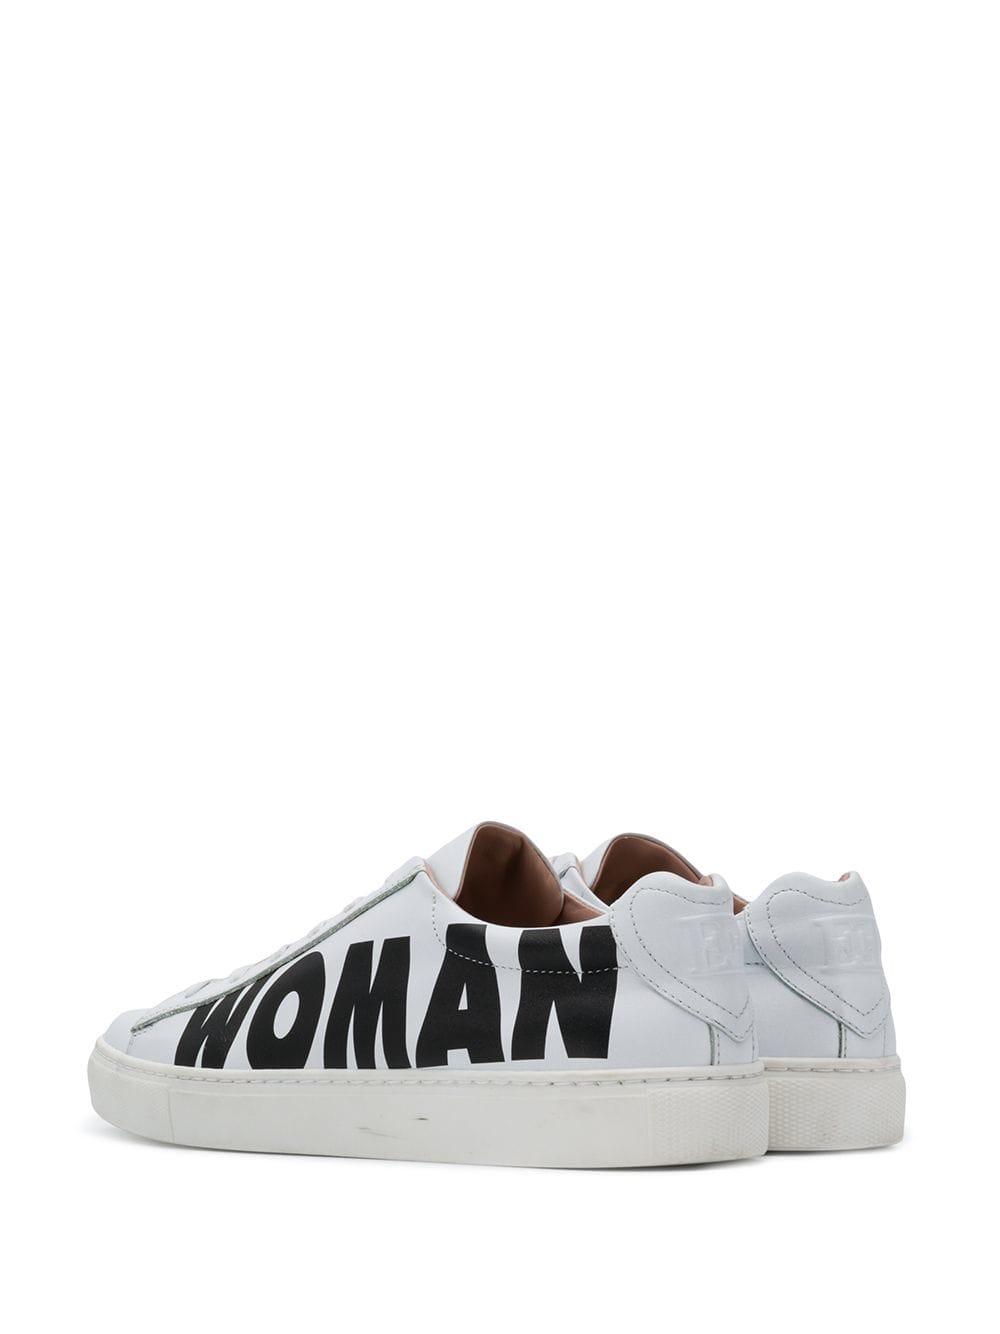 ESCADA Leather Strong Printed Sneakers in White - Lyst